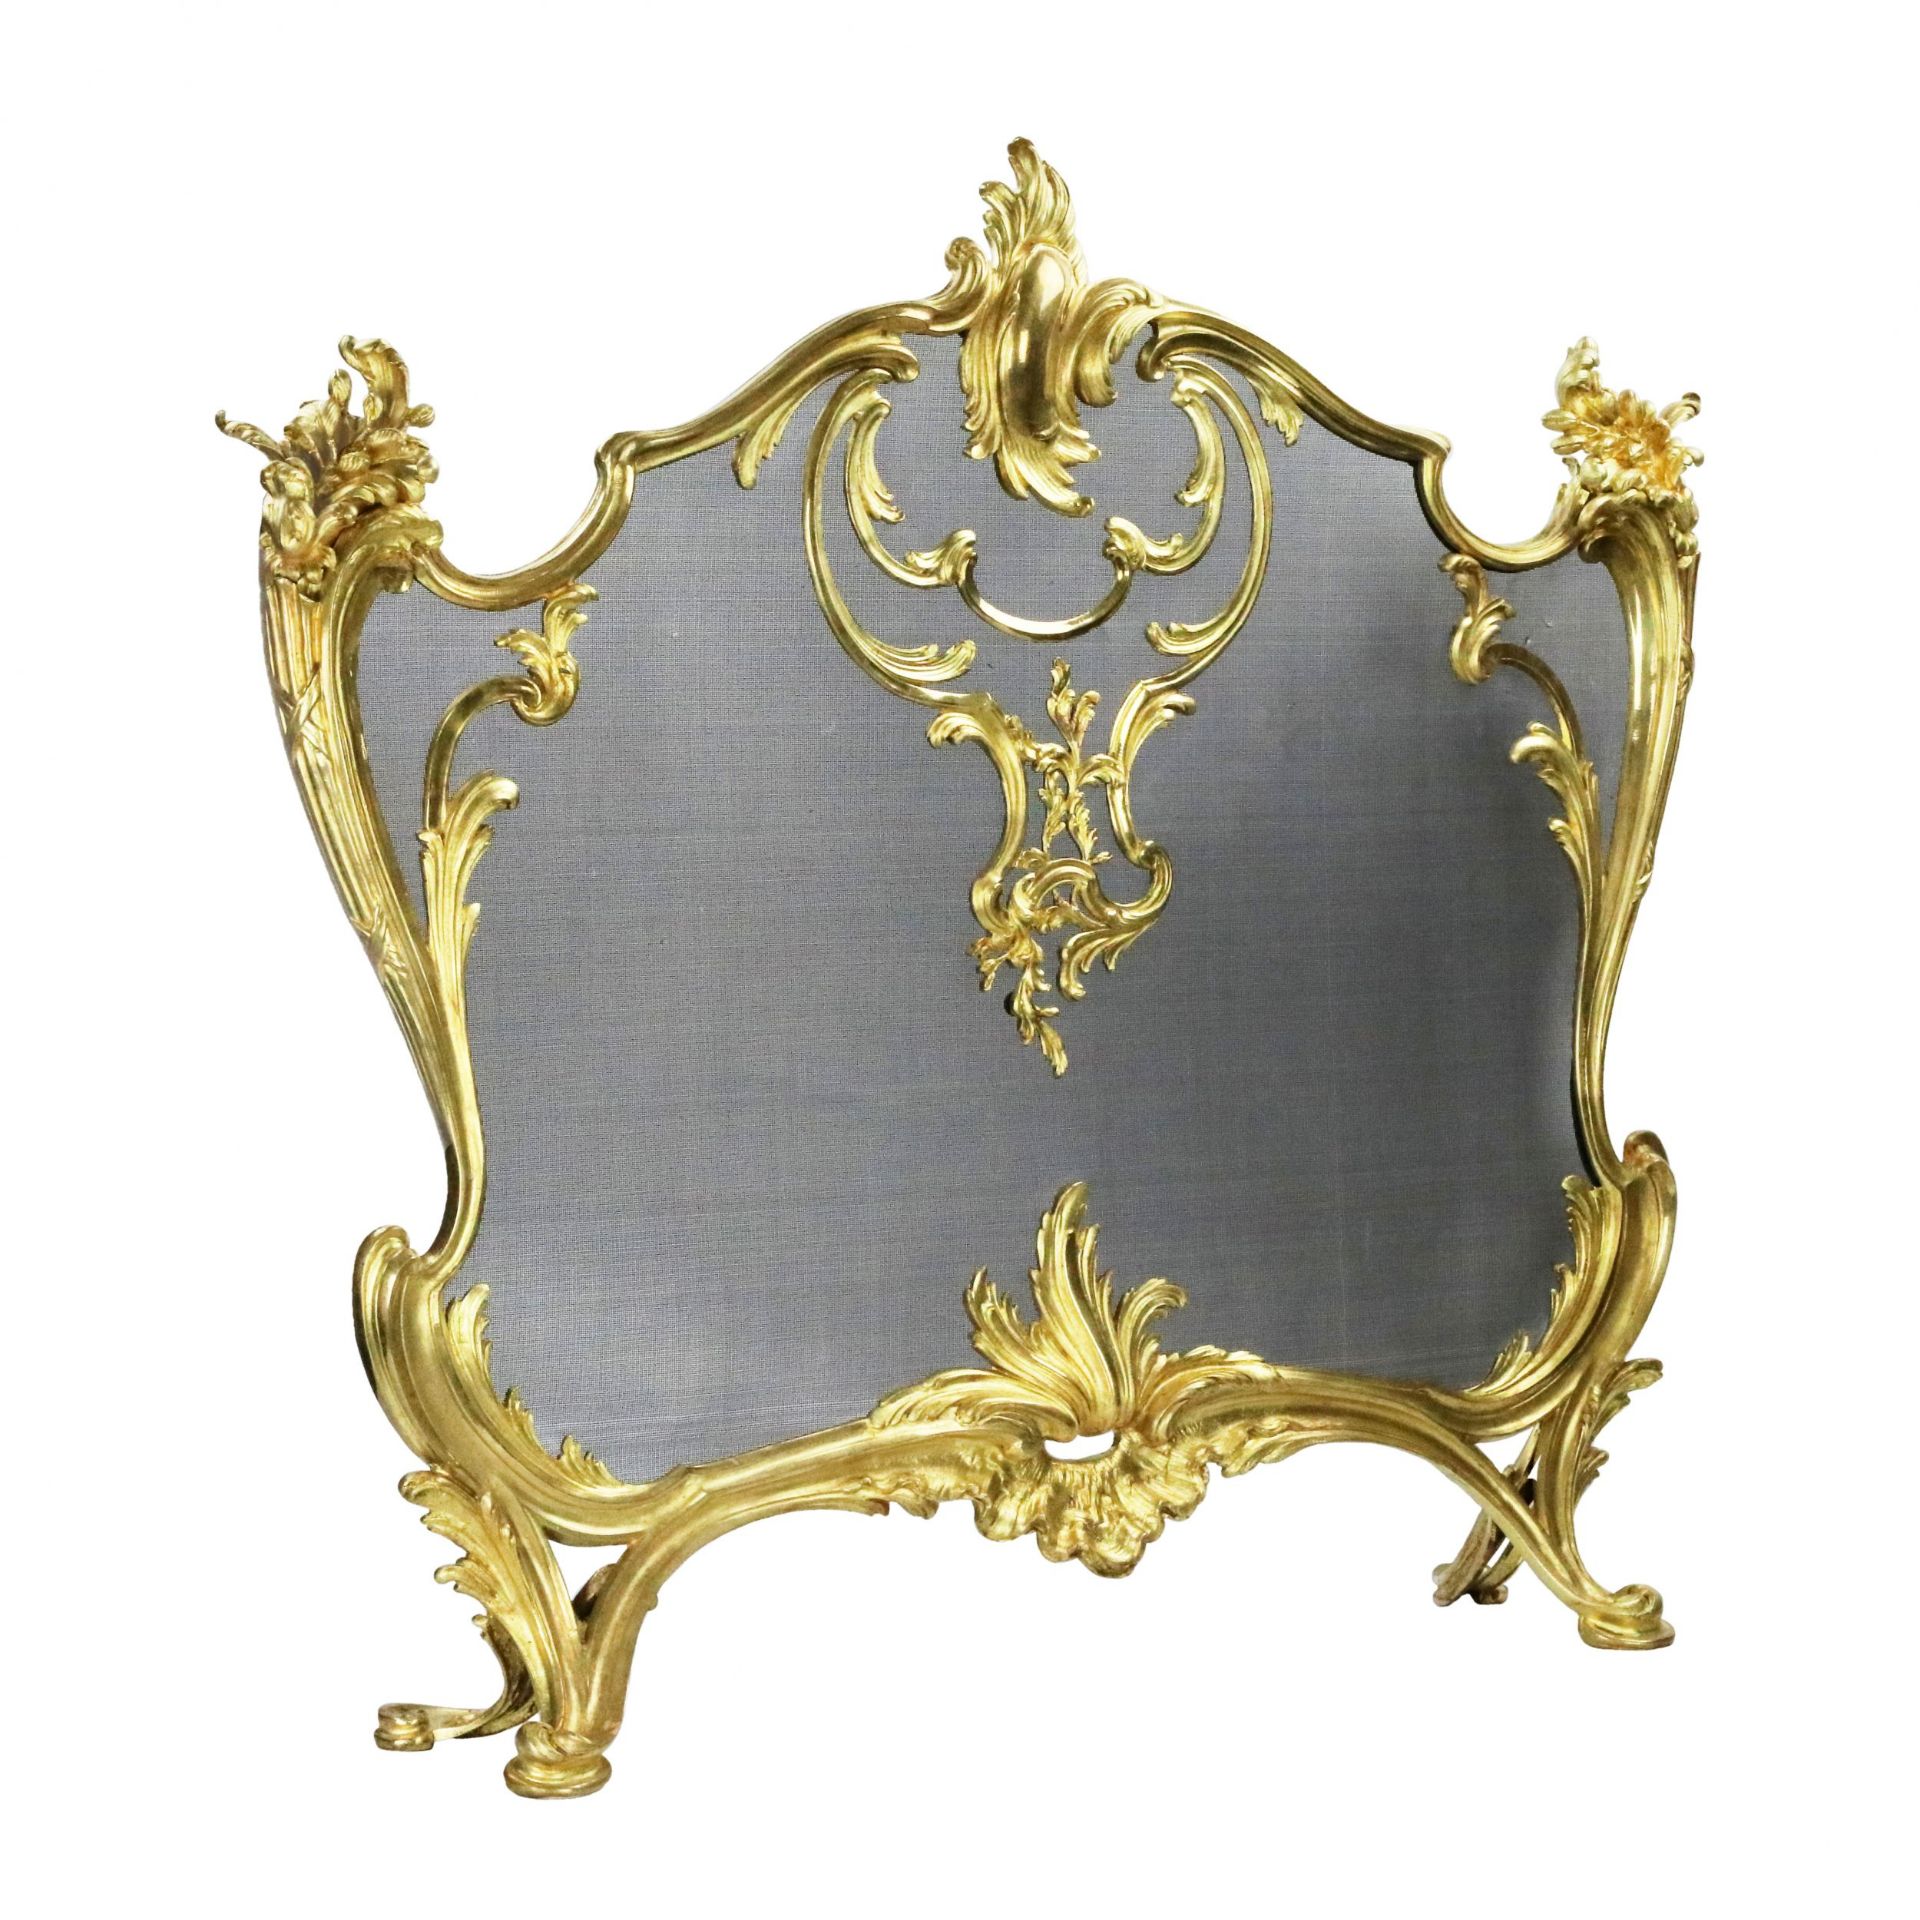 Bouhon. Fireplace screen in gilded bronze with metal protective mesh, Louis XV style. - Image 3 of 5